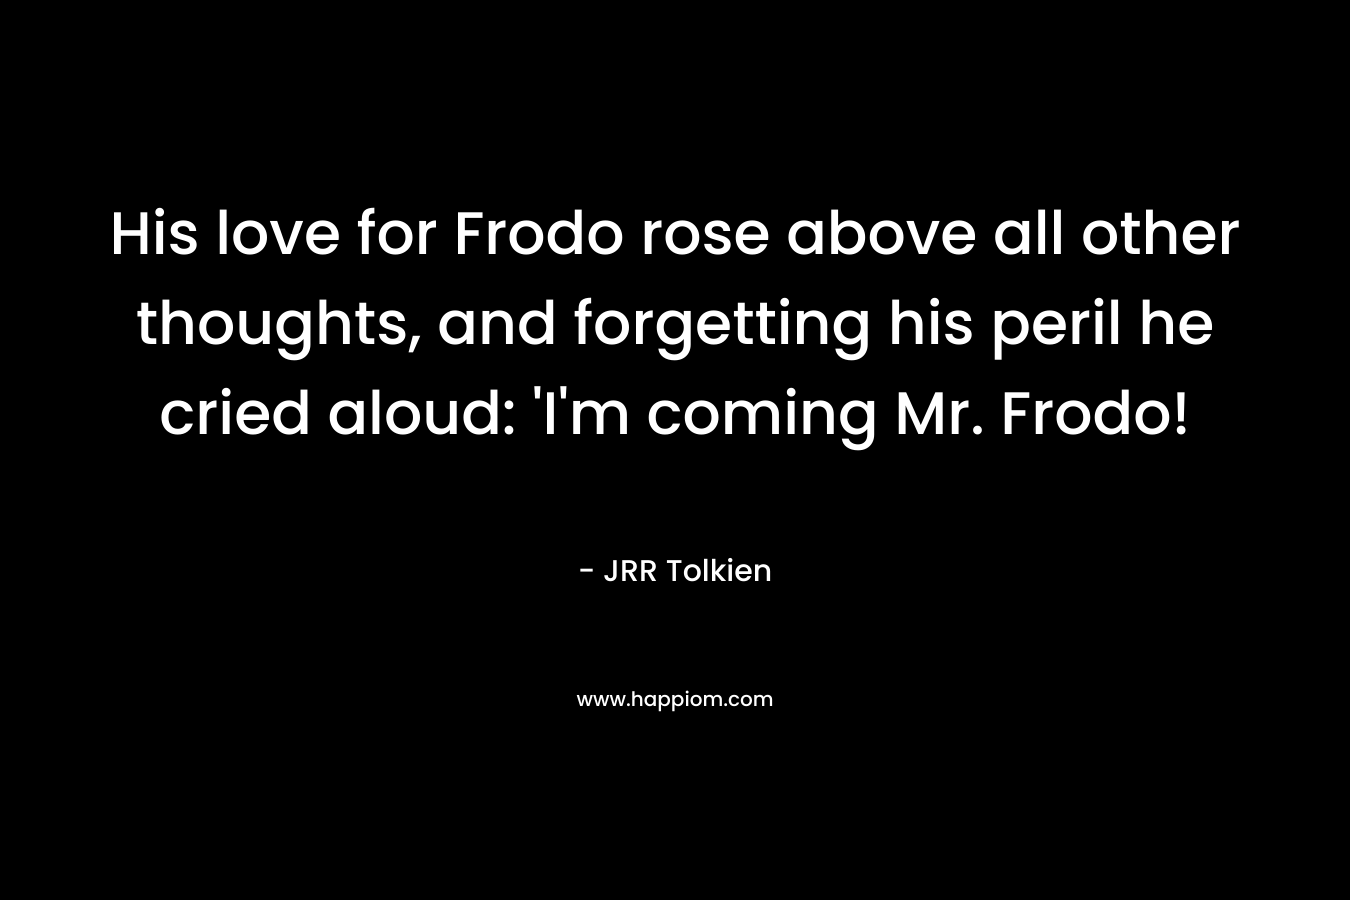 His love for Frodo rose above all other thoughts, and forgetting his peril he cried aloud: ‘I’m coming Mr. Frodo! – JRR Tolkien